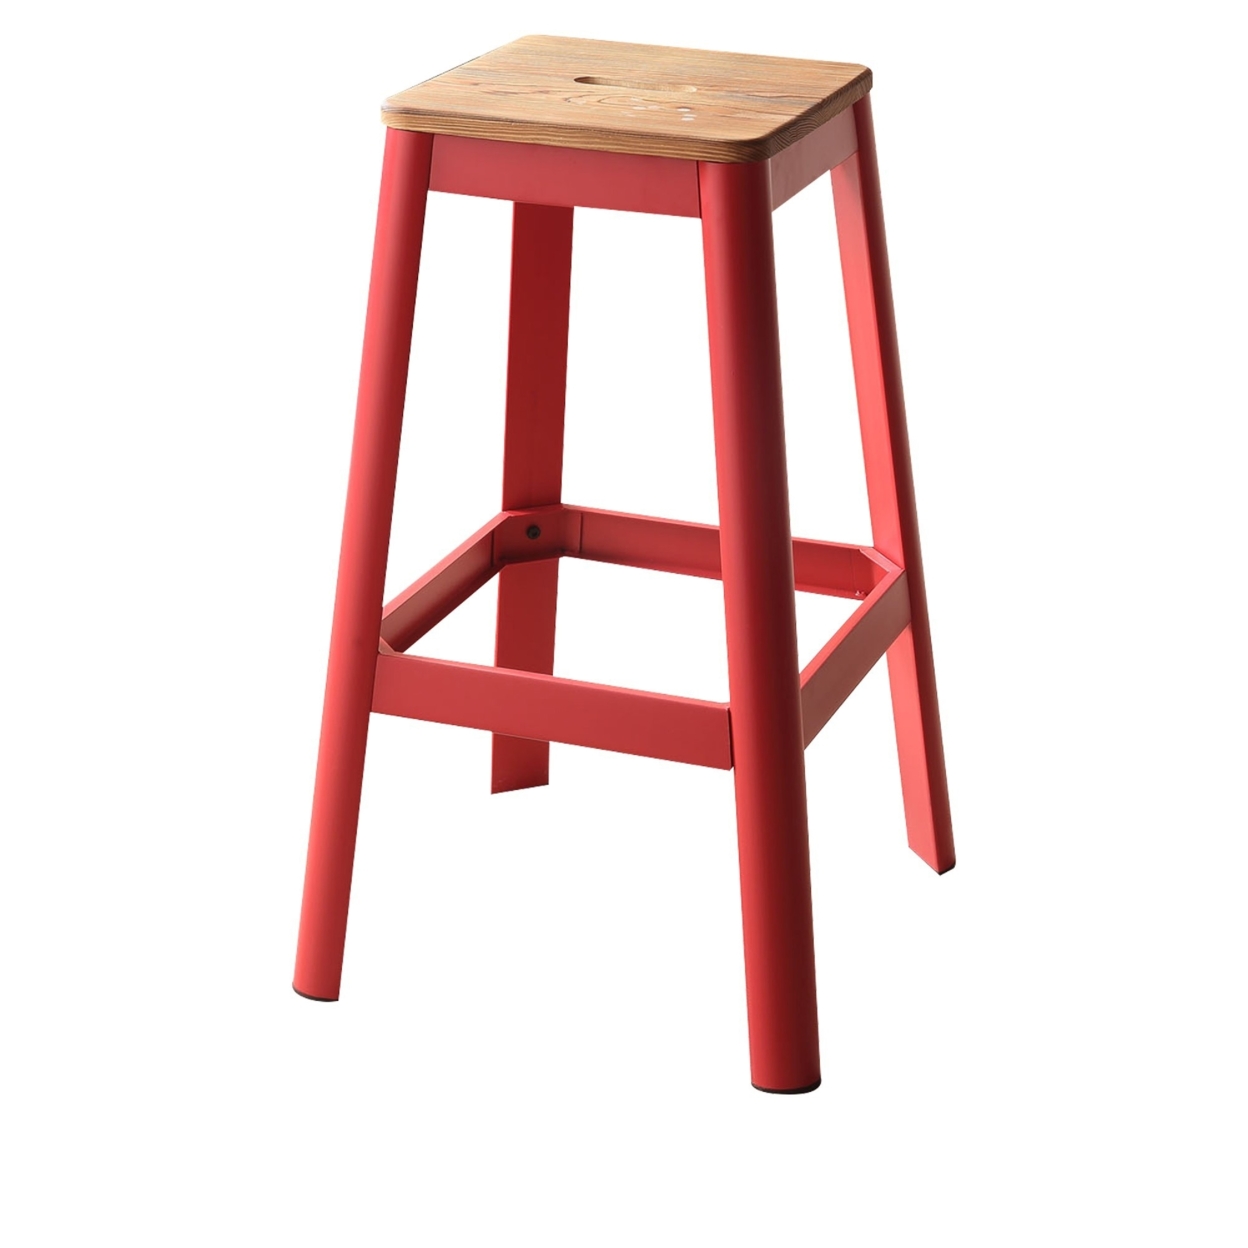 Industrial Style Metal Frame And Wooden Bar Stool, Brown And Red- Saltoro Sherpi